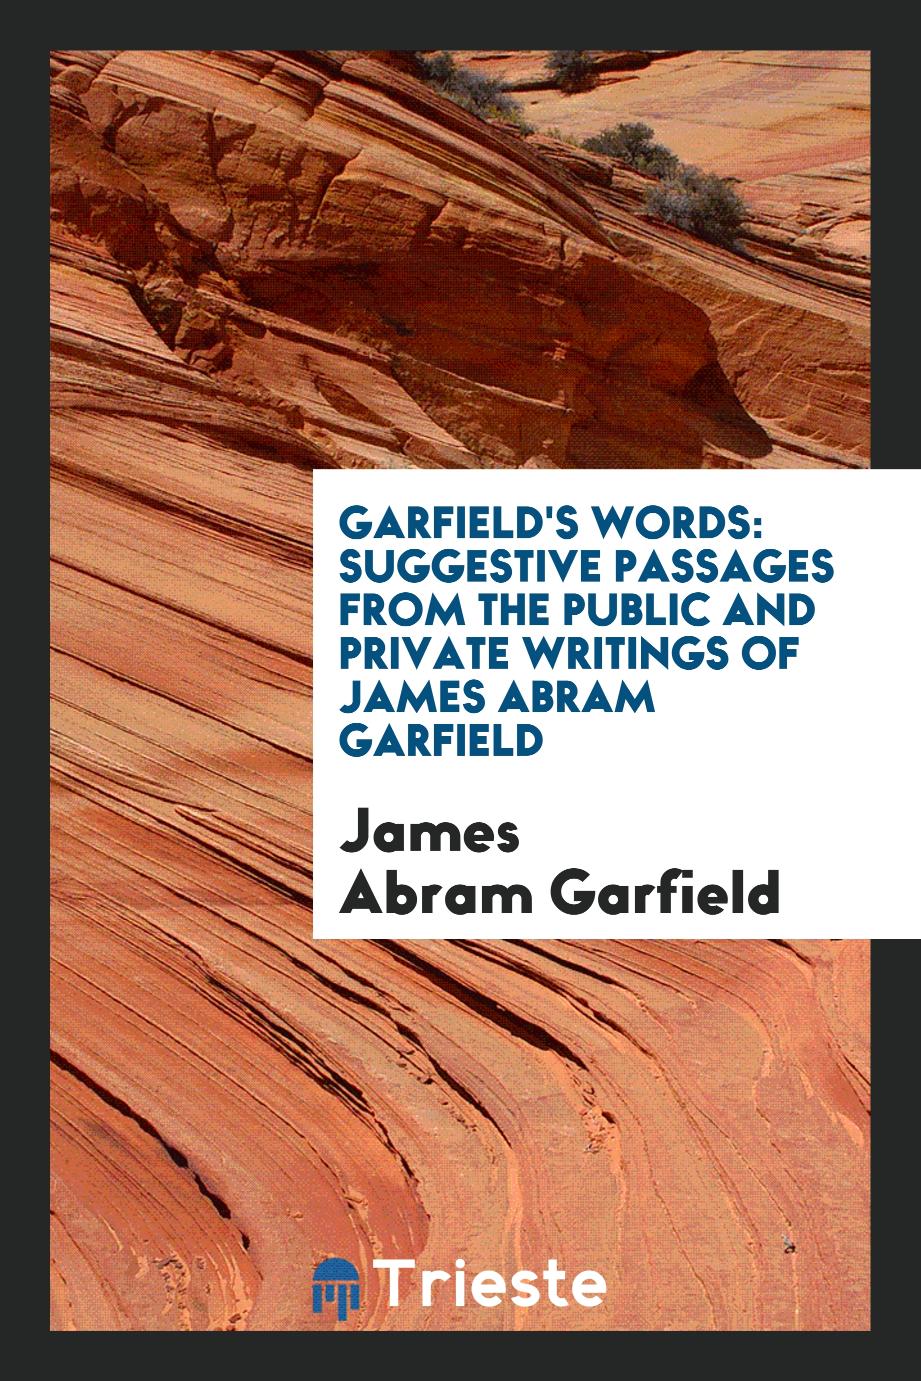 Garfield's words: suggestive passages from the public and private writings of James Abram Garfield